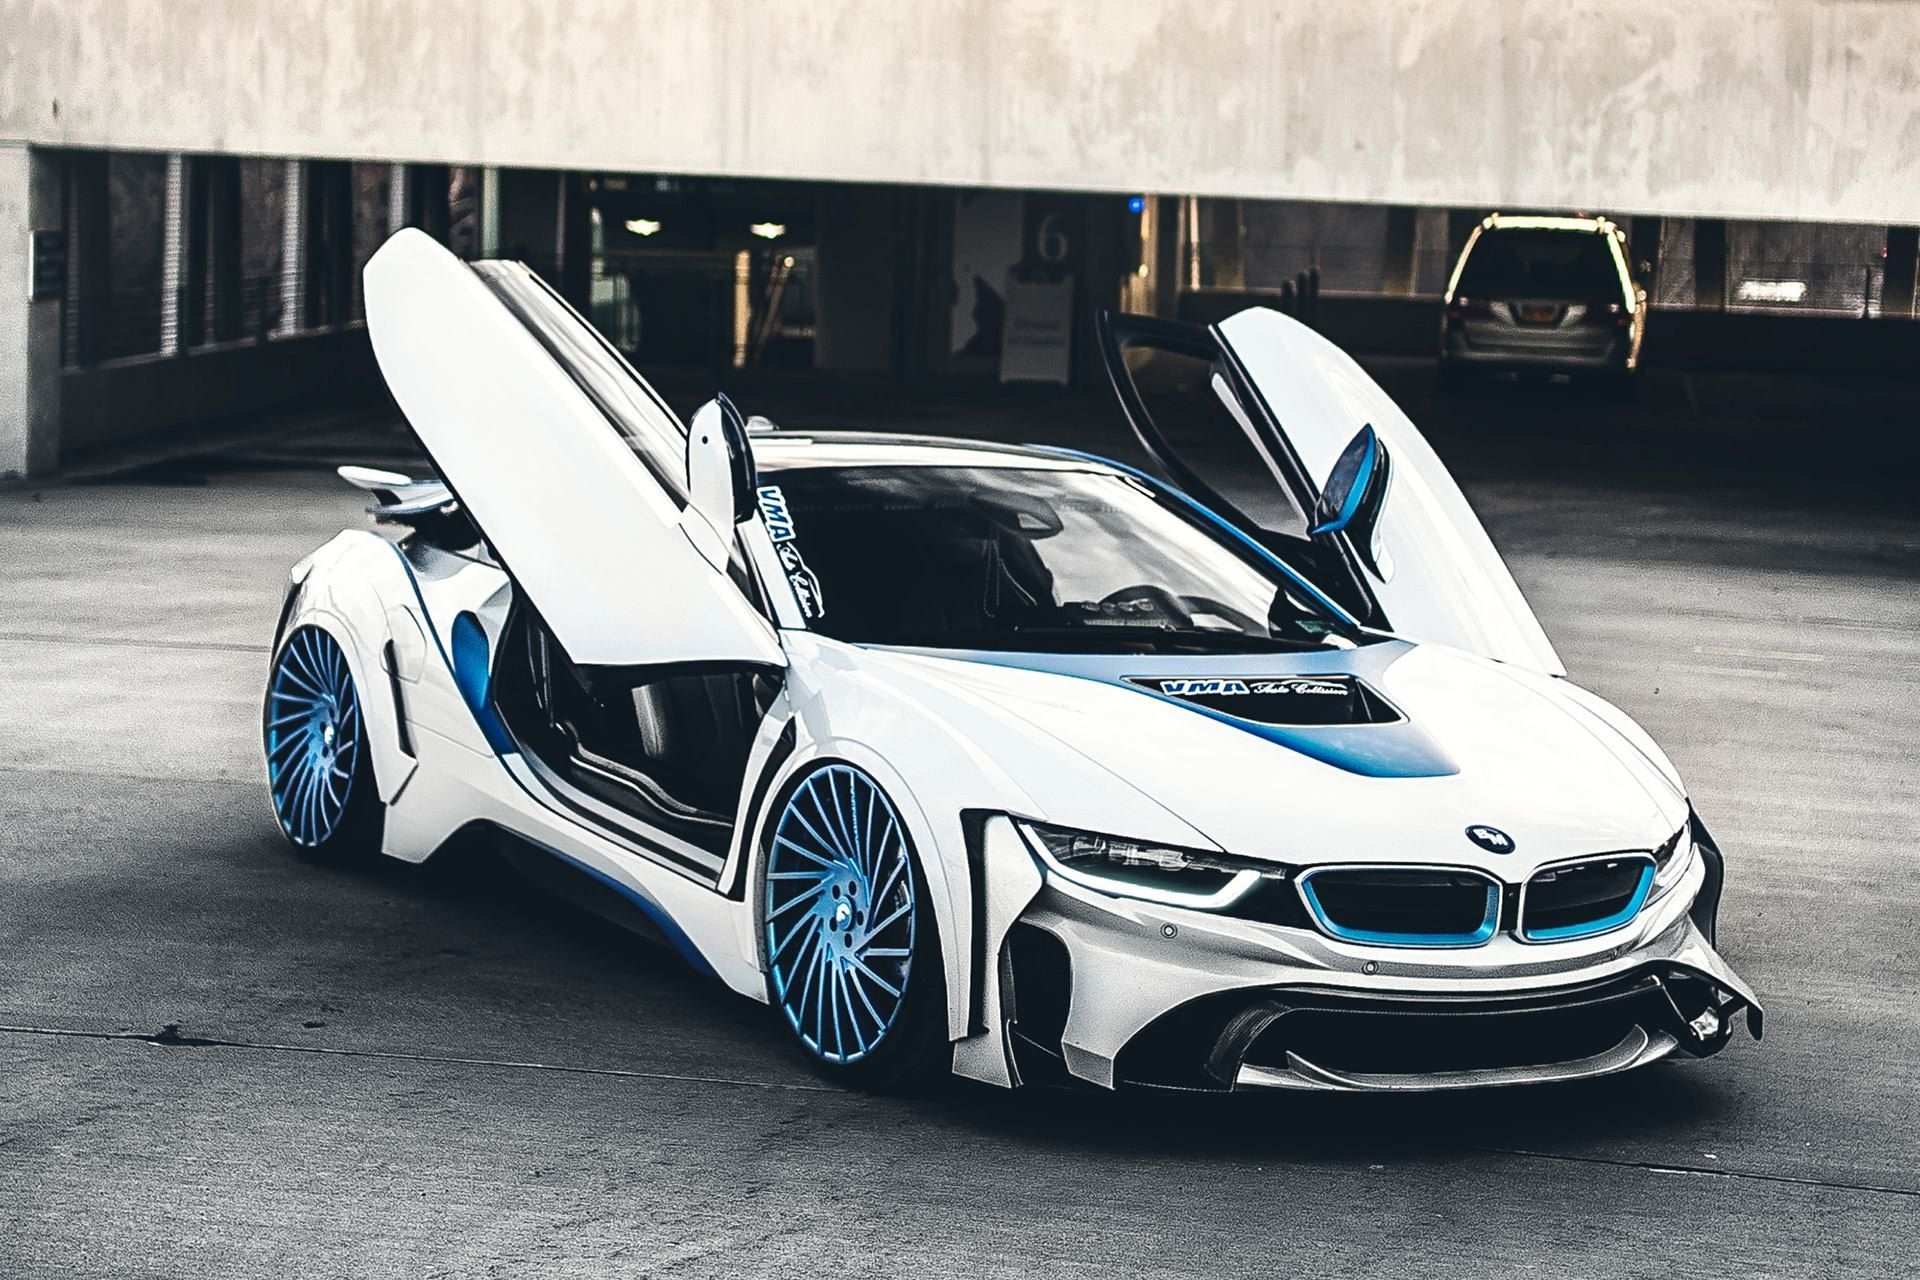 Spaceship In The Form Of The Car Custom White Bmw I8 With Blue